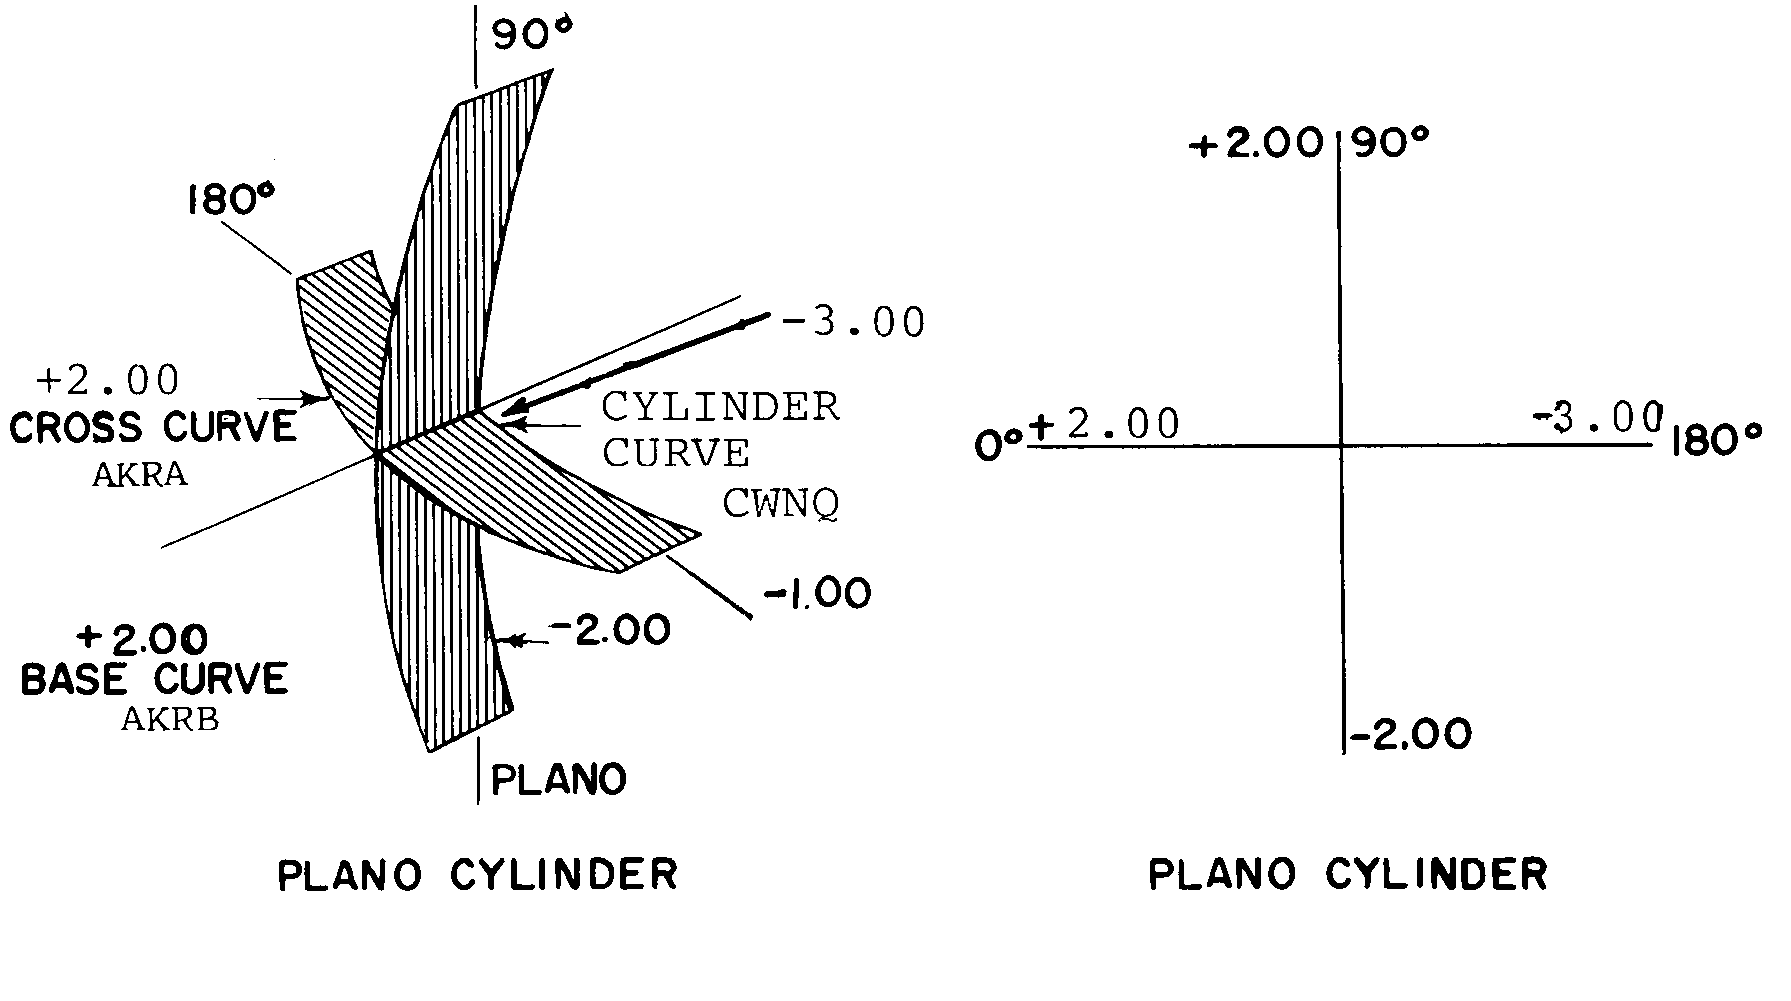 PLANO CYLINDER style nsn 6540-01-102-4300